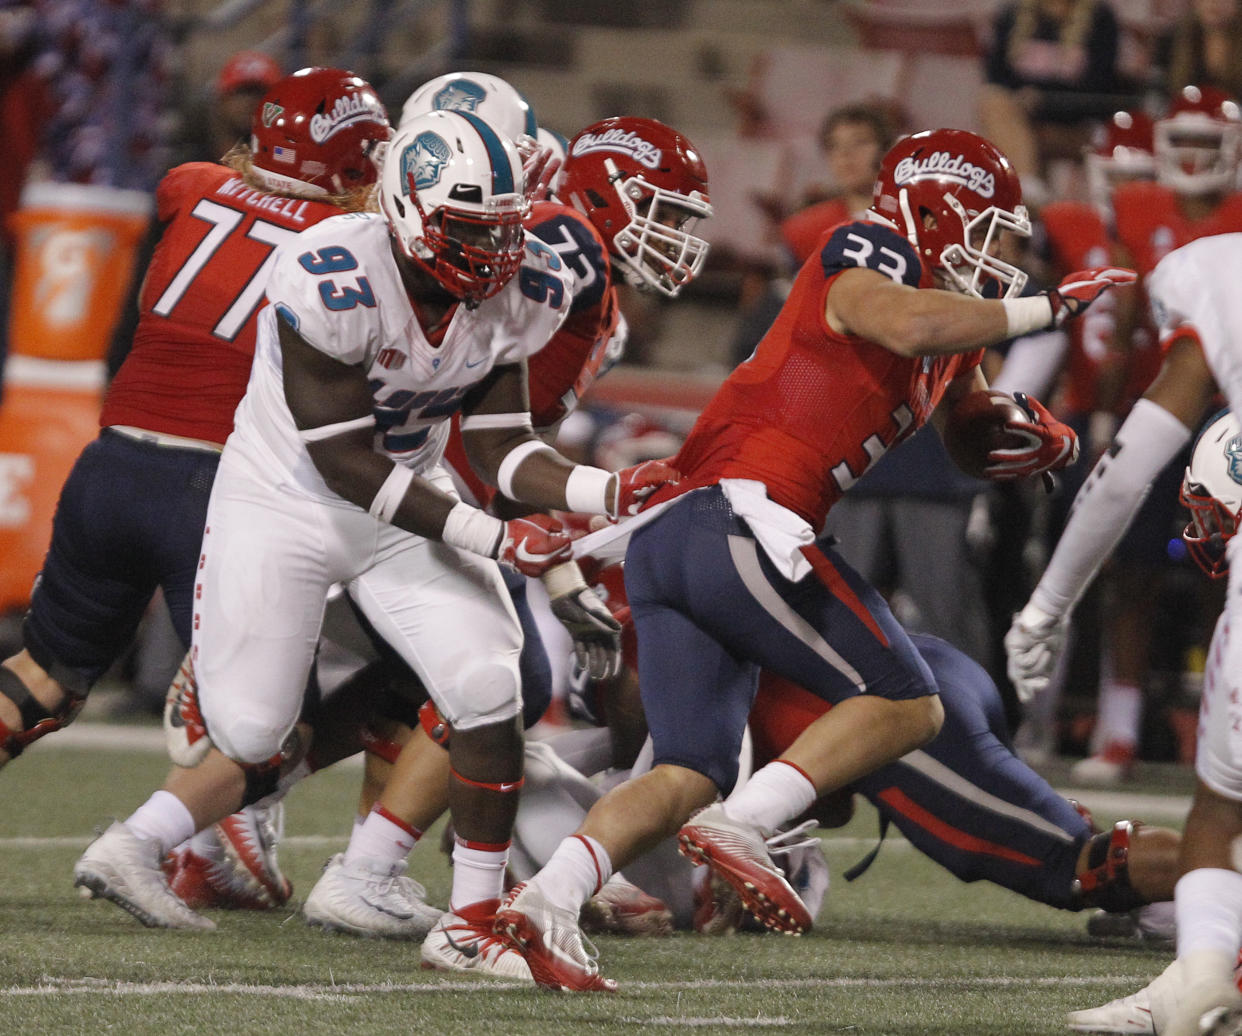 Fresno State's Josh Hokit runs downfield against New Mexico's Nahje Flowers during the second half of an NCAA college football game in Fresno, Calif., Saturday, Oct. 14, 2017. Fresno State won 38-0. (AP Photo/Gary Kazanjian)